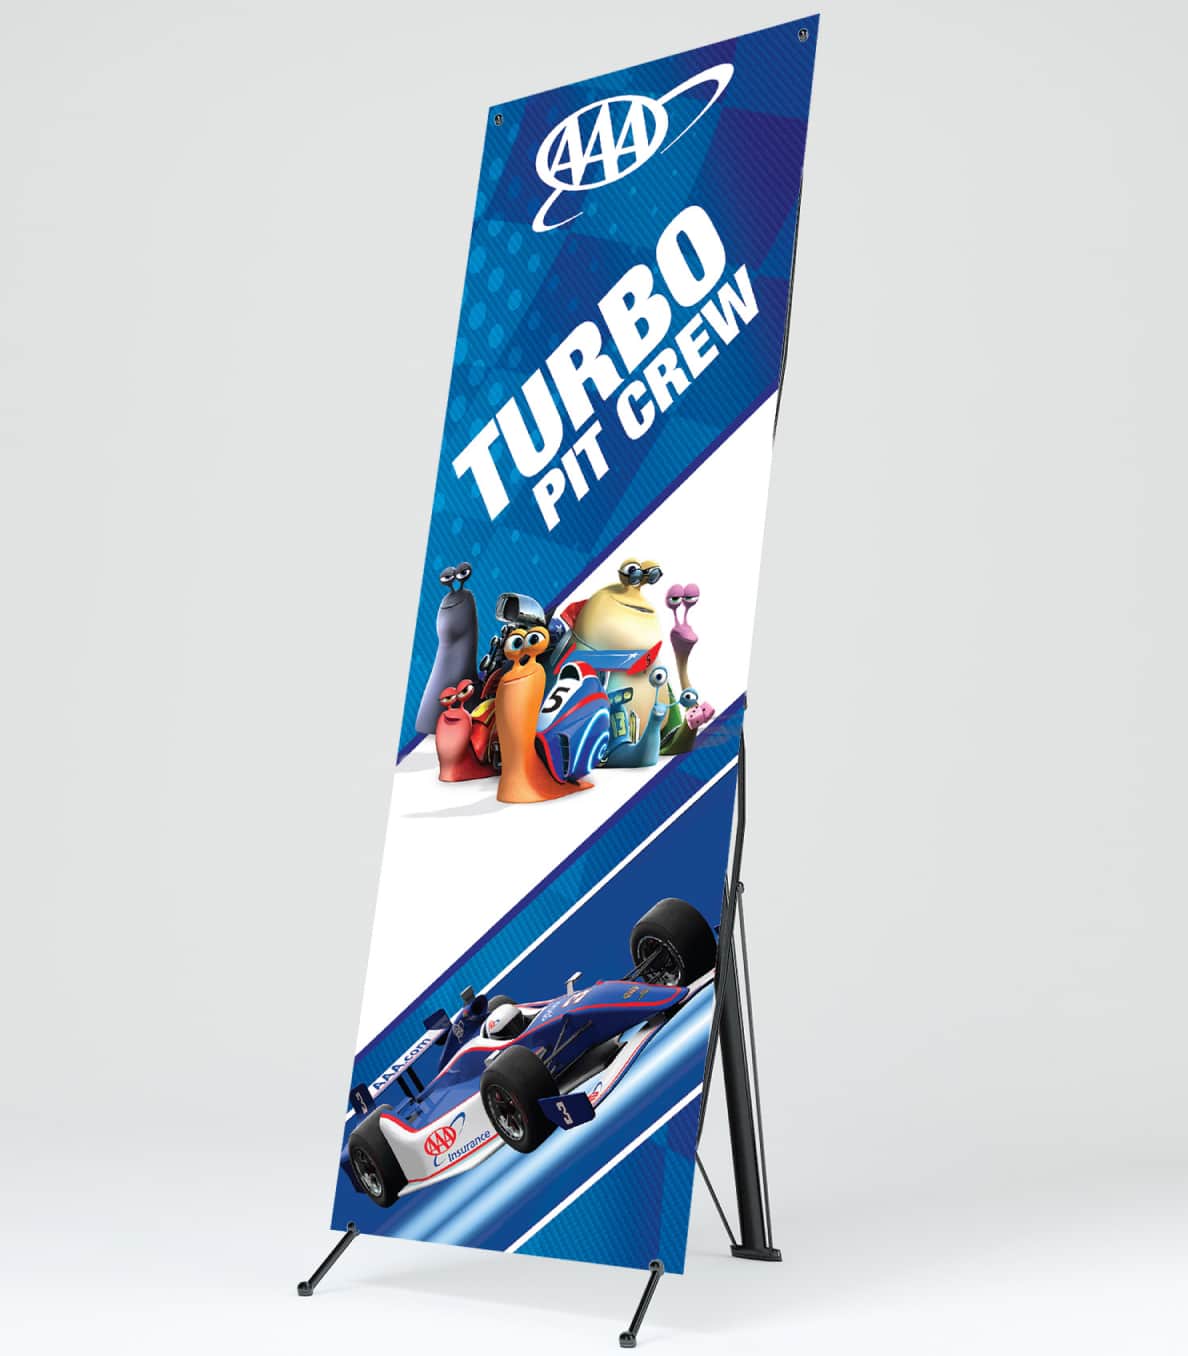 A vertical pull-up banner for a 'TURBO PIT CREW' event featuring animated characters and images of a race car, with AAA branding at the top.